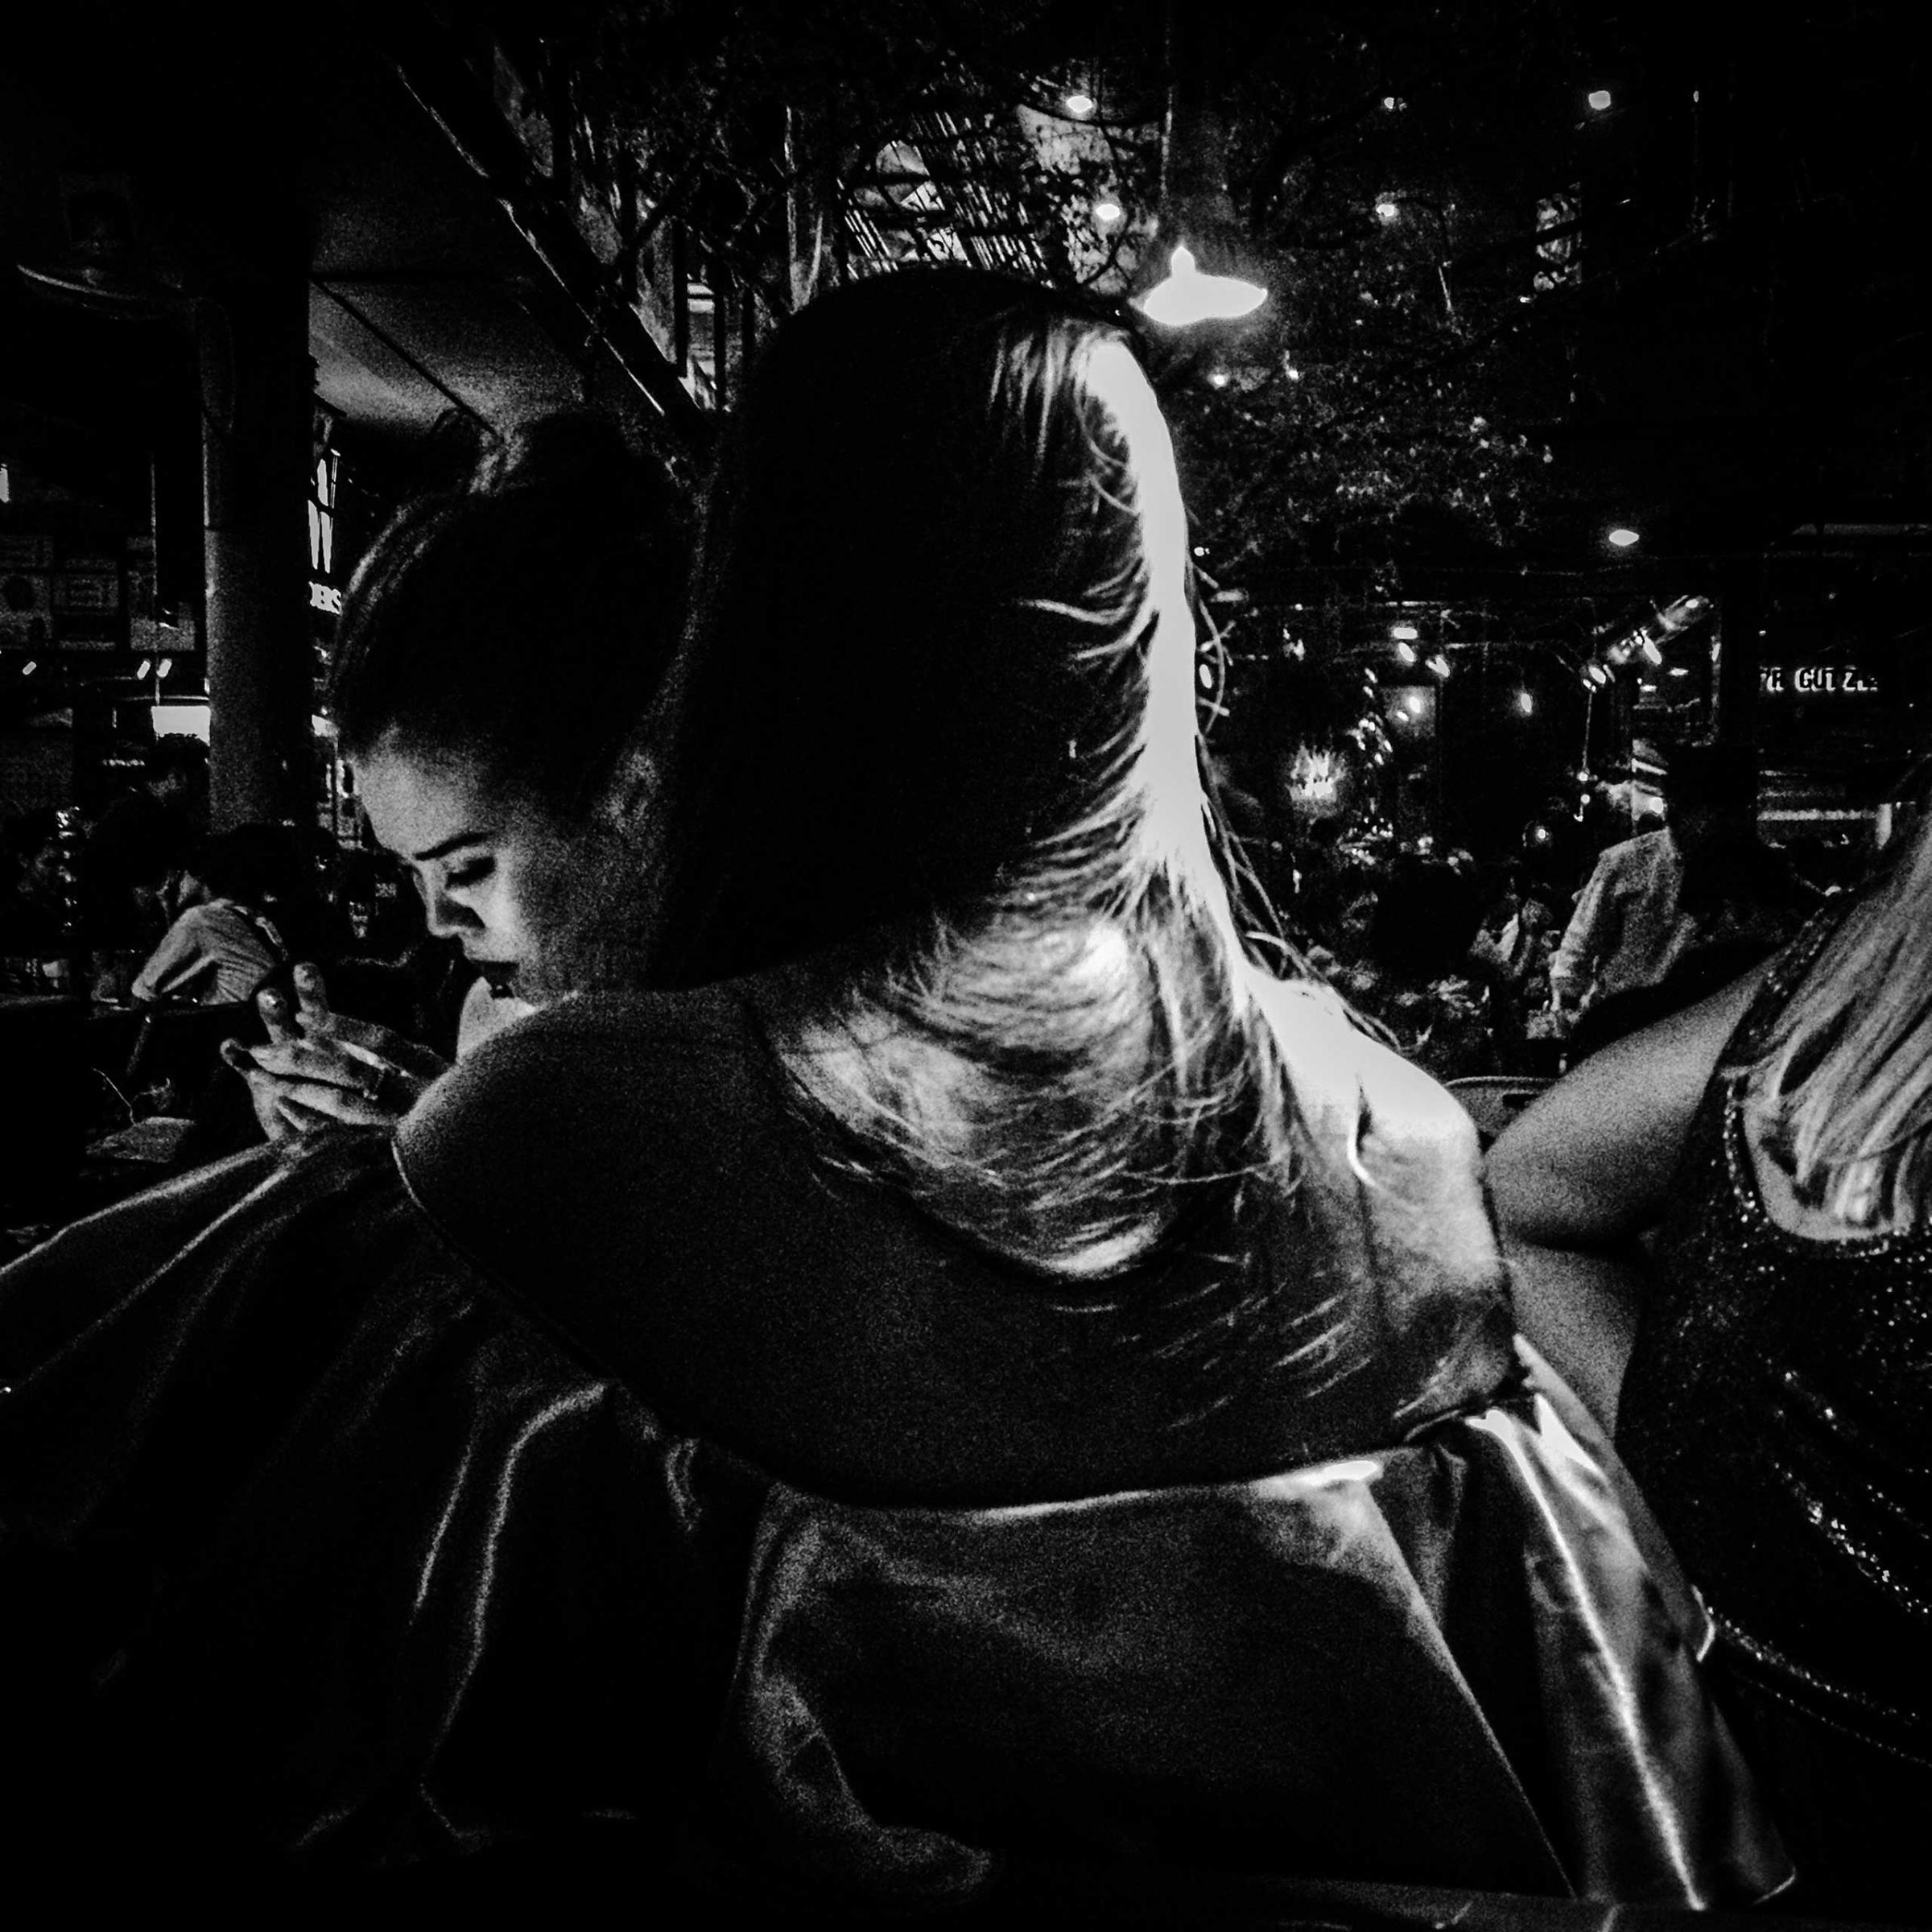 In this image, taken on Thonglor Soi (alley) 13, several girls are spending their evening at Scenespace, a collection of bars and restaurants with outdoor seating that is popular almost every night of the week. Thonglor is one of Bangkok's most hip streets, catering mostly to wealthy 20 and 30 somethings. You won't find drunk backpackers here and it remains relatively free of the prostitution and sex clubs - at least openly - that Bangkok has long been famous for but that really only represent small sections of an otherwise interesting and fascinating city.Photo by @amcaptures (andre malerba)